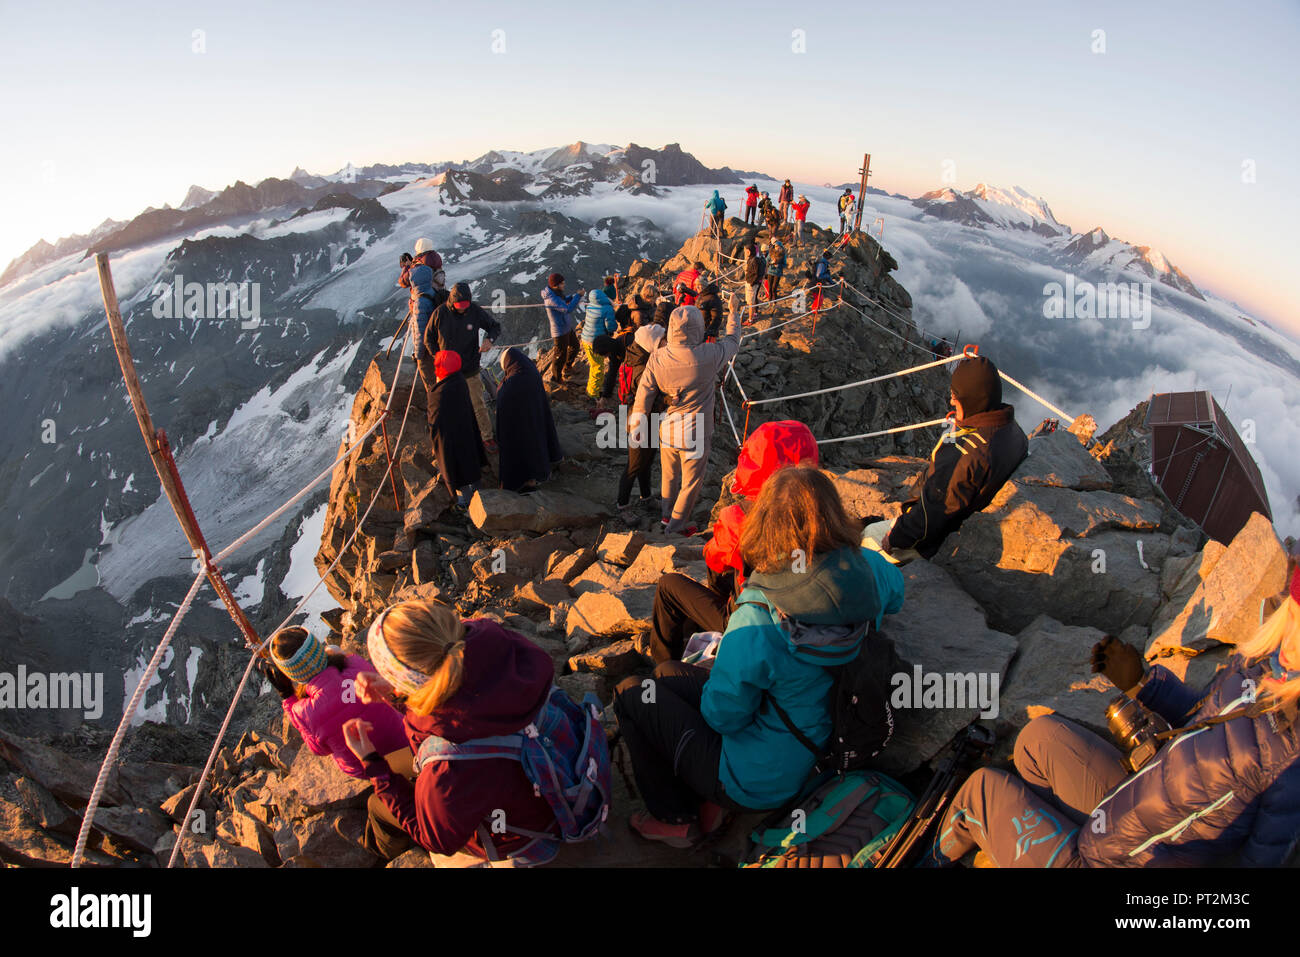 Switzerland, canton Valais, district Entremont, Verbier, sunrise, 3329 m high Mont-Fort, people enjoying the view Stock Photo